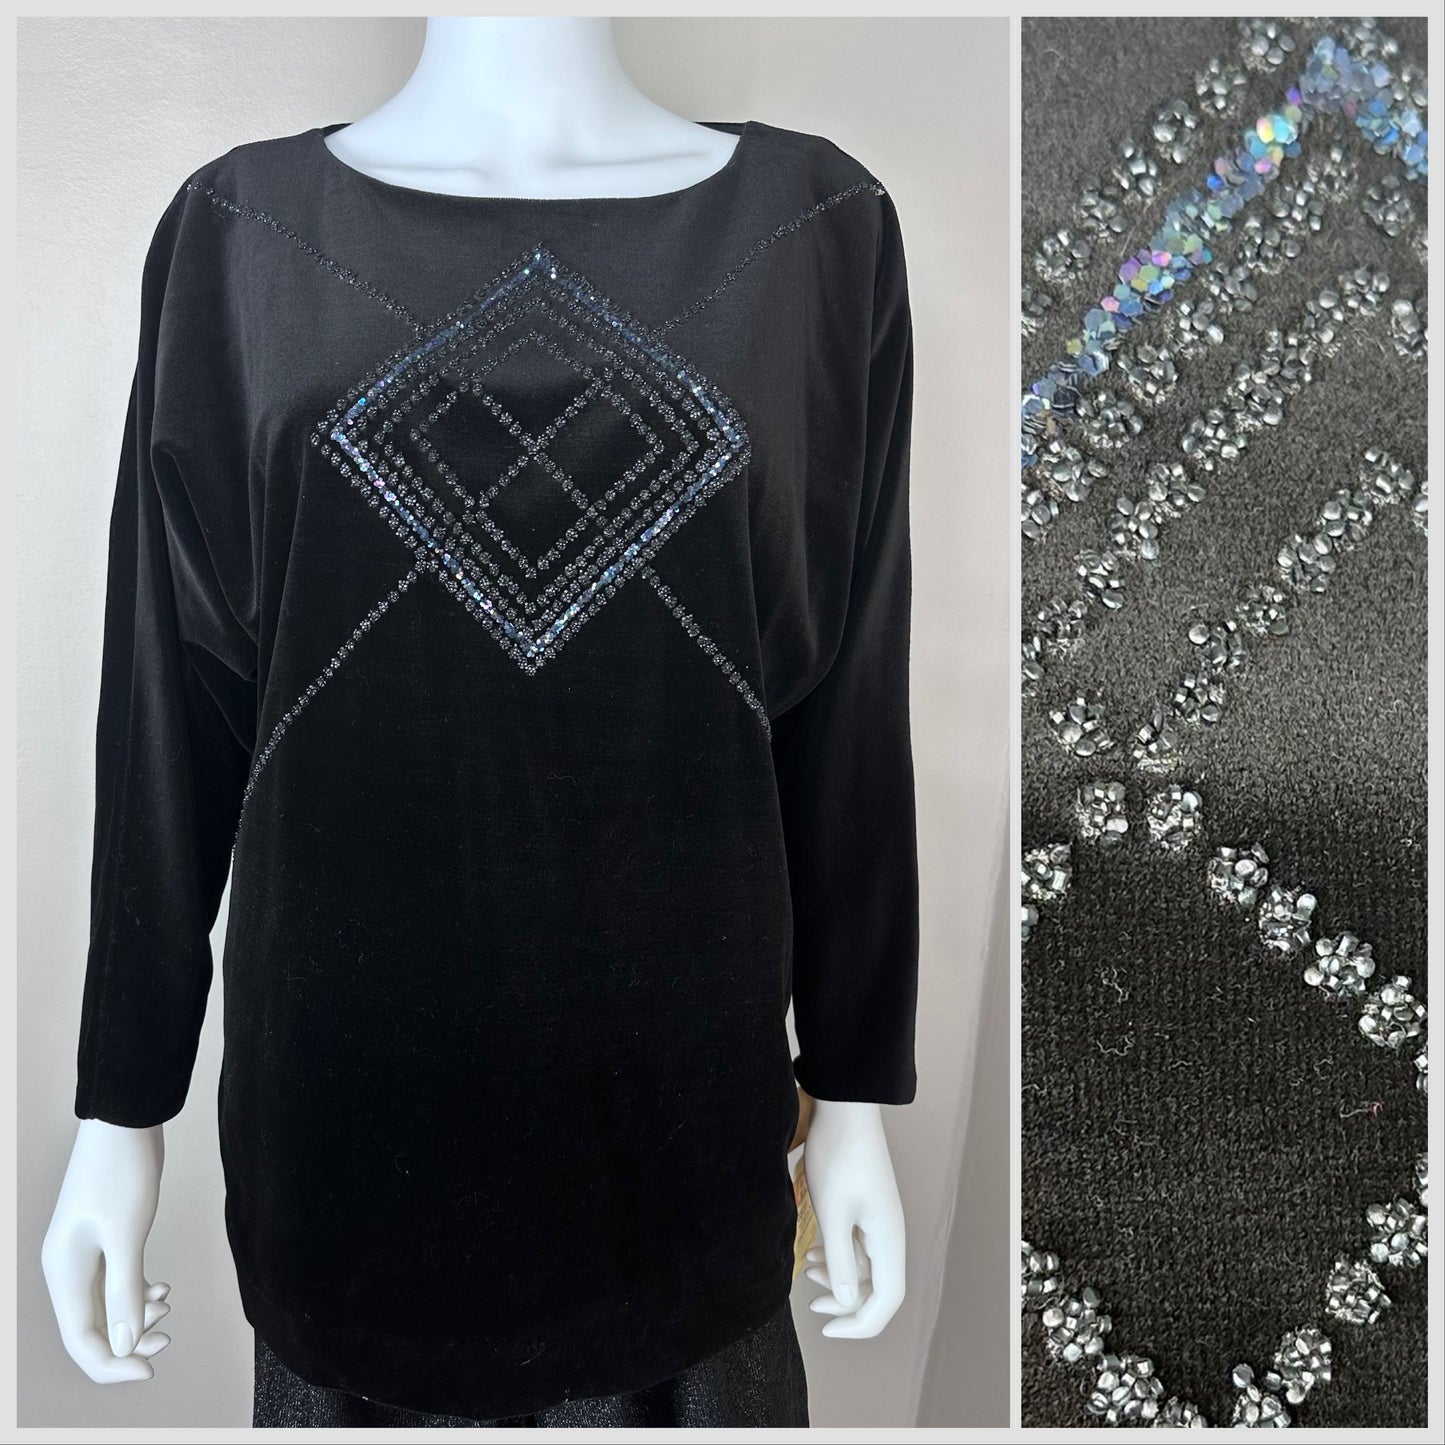 1970s Black Velvet Top with Glitter Design, Act III Size M/L, Deadstock with Tags